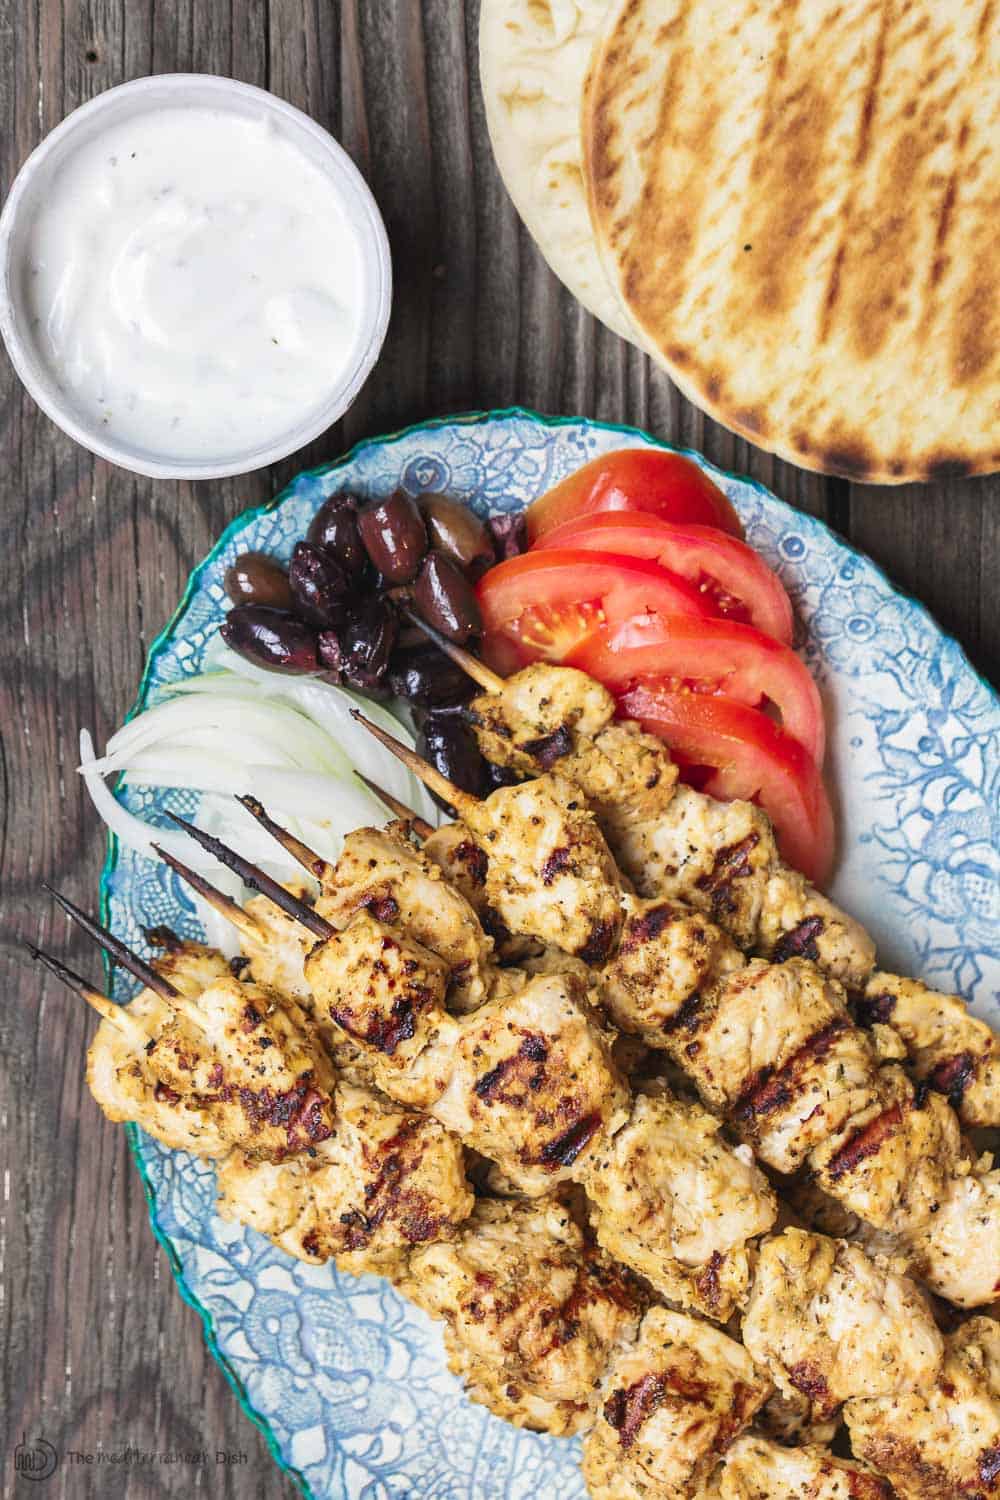 This homemade chicken souvlaki recipe takes you to the streets of Athens! Complete with the best souvlaki marinade; instructions for indoor or outdoor grilling; and what to serve with your souvlaki. Recipe from themediterraneandish.com #greekfood #souvlaki #kebab #kabob #chickensouvlaki #chickenkabob #mediterraneanfood #mediterraneandiet #mediterraneanrecipe #grilledchicken 